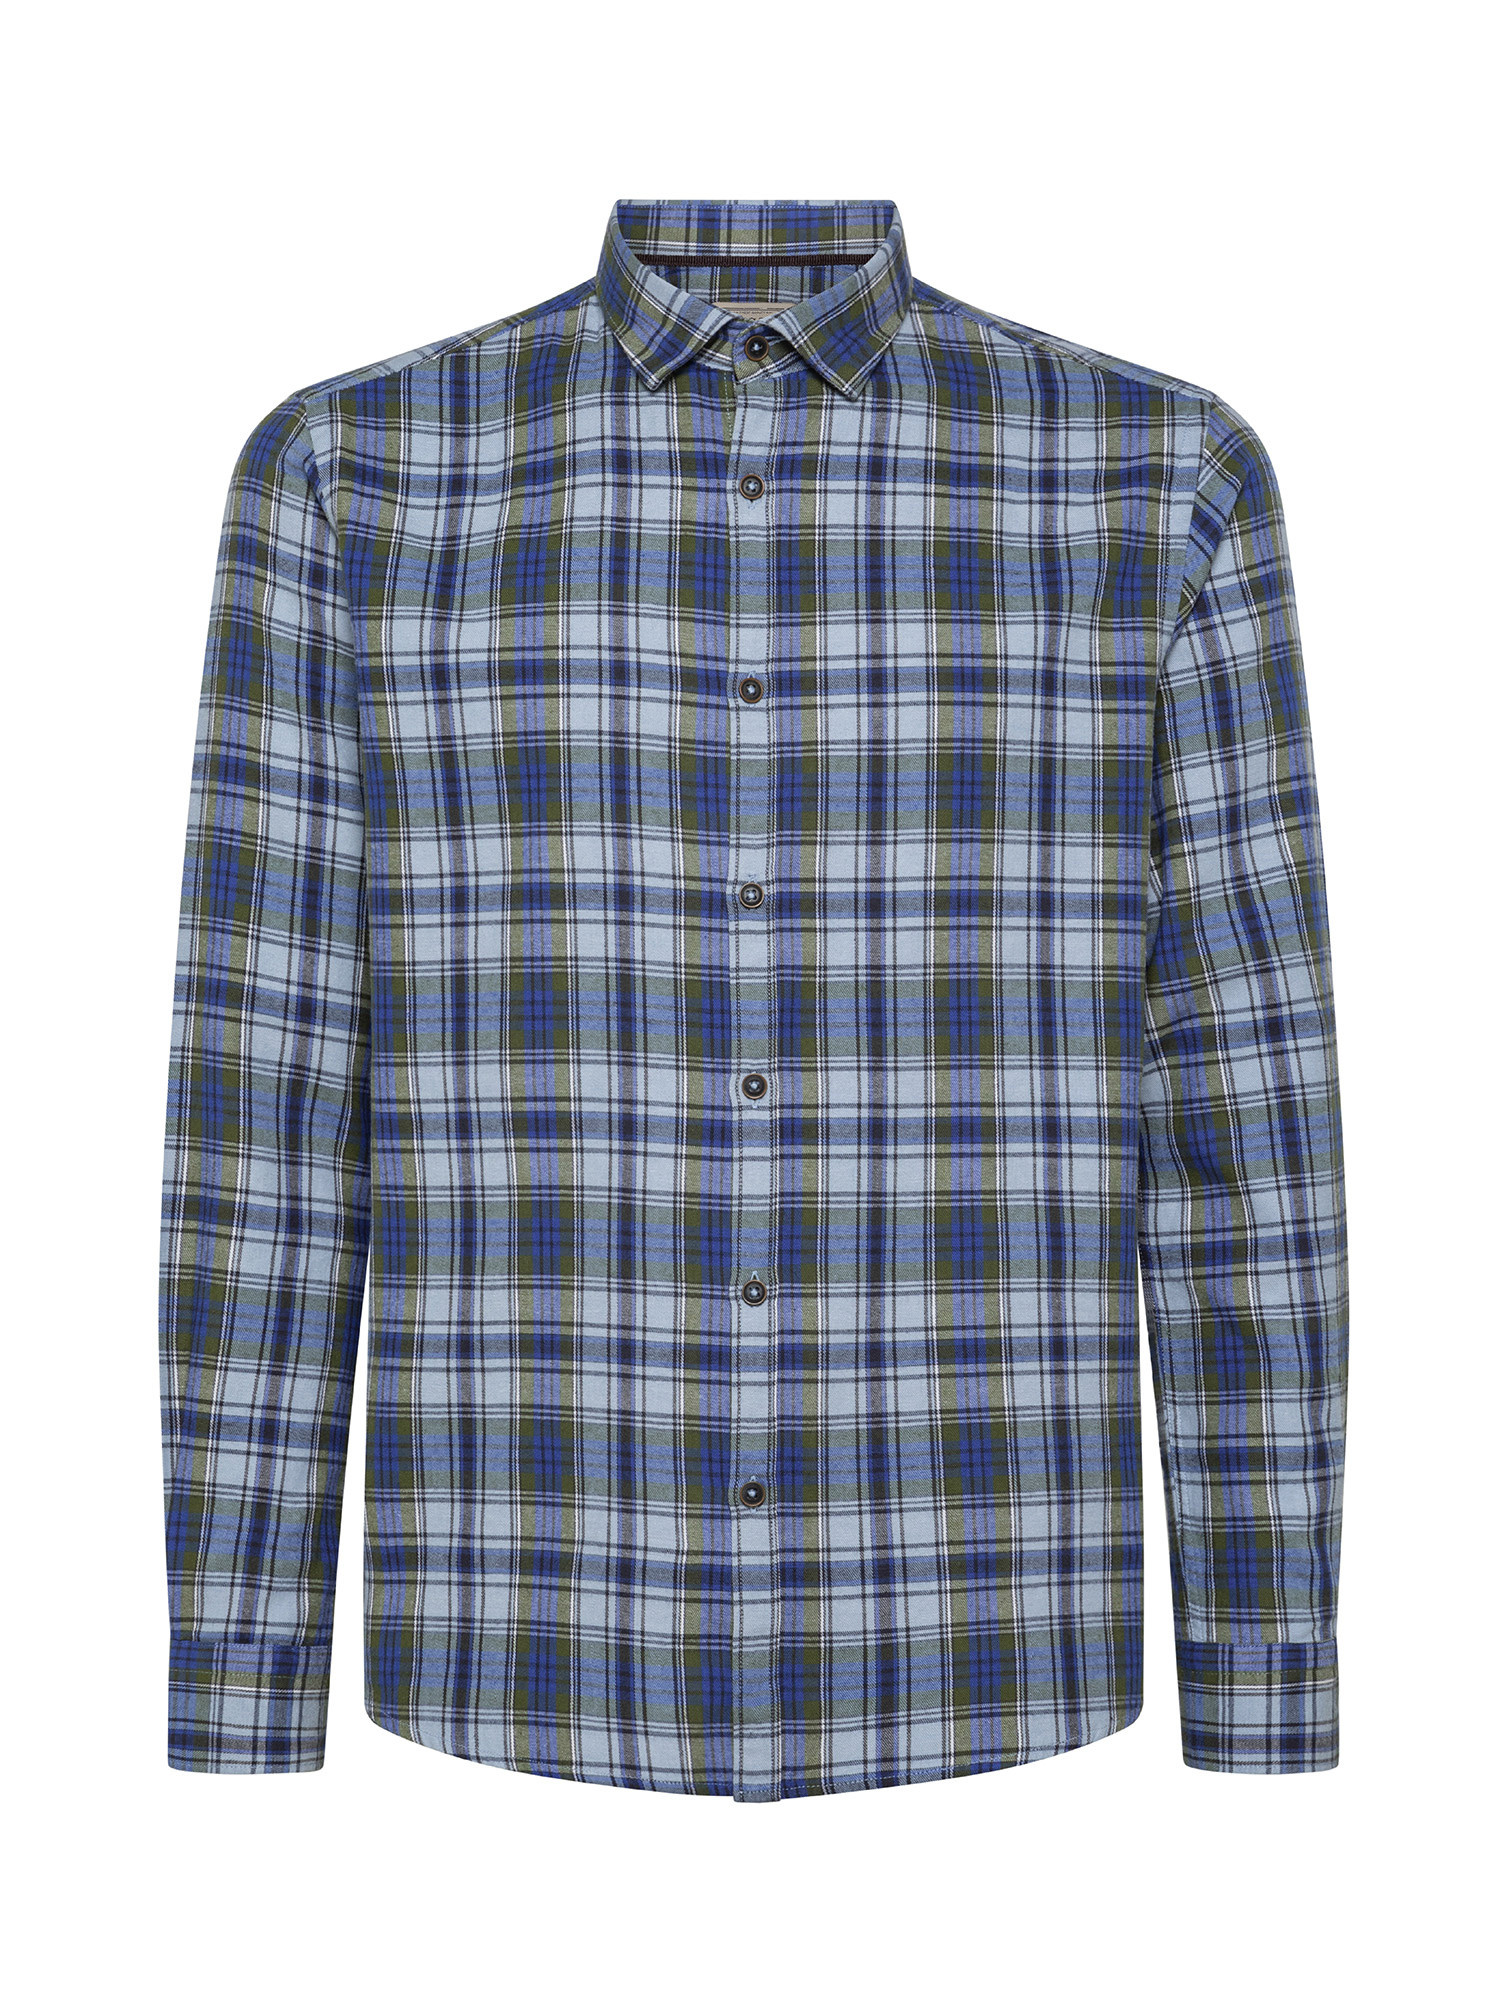 JCT - Checked shirt in soft flannel, Green, large image number 0